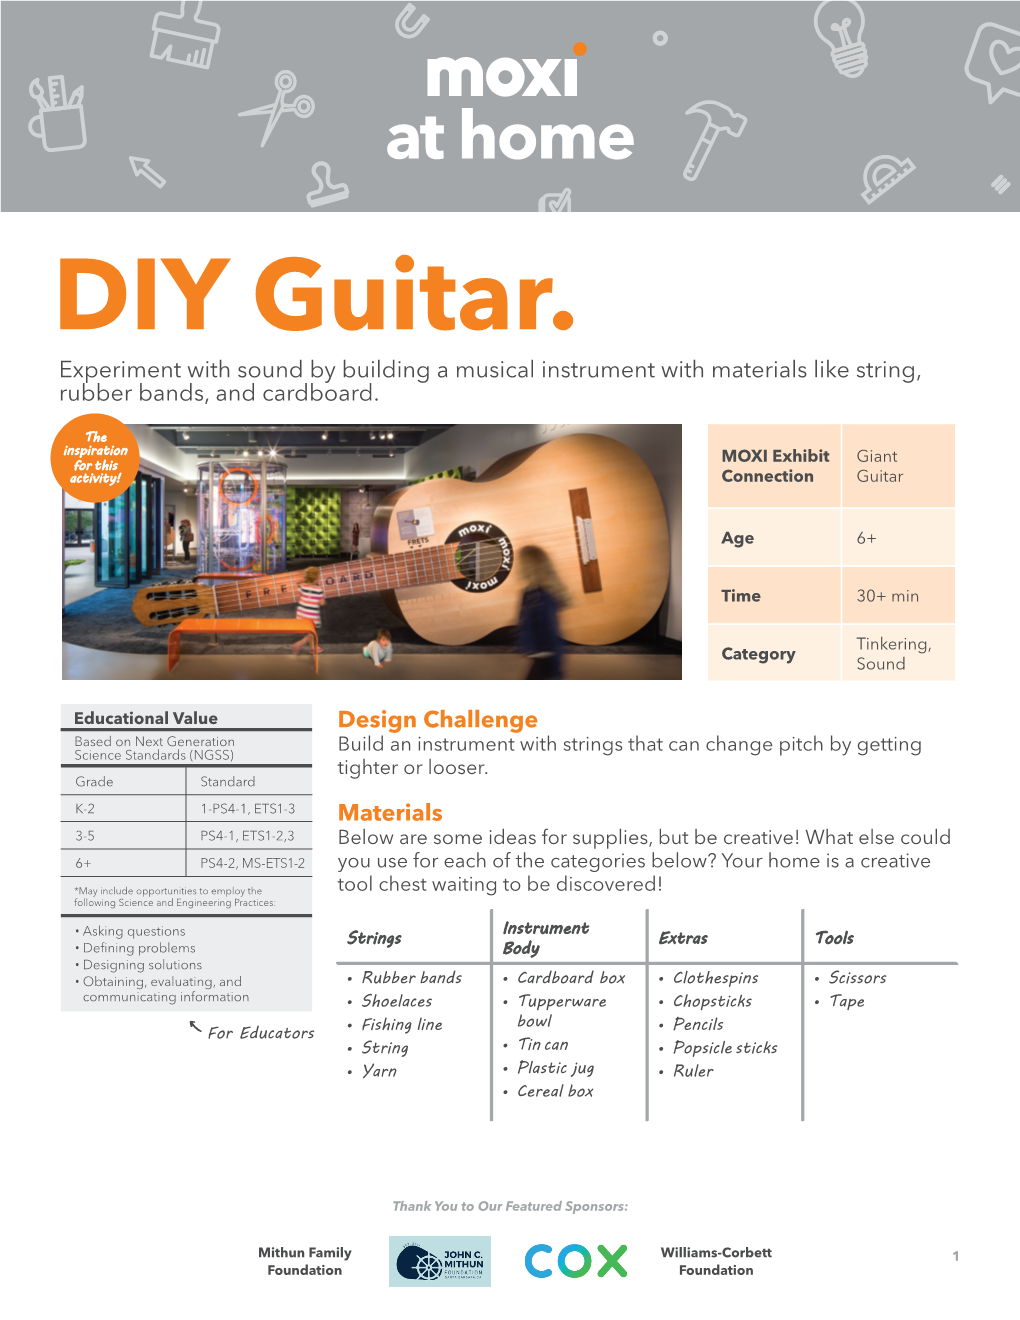 DIY Guitar. Experiment with Sound by Building a Musical Instrument with Materials Like String, Rubber Bands, and Cardboard